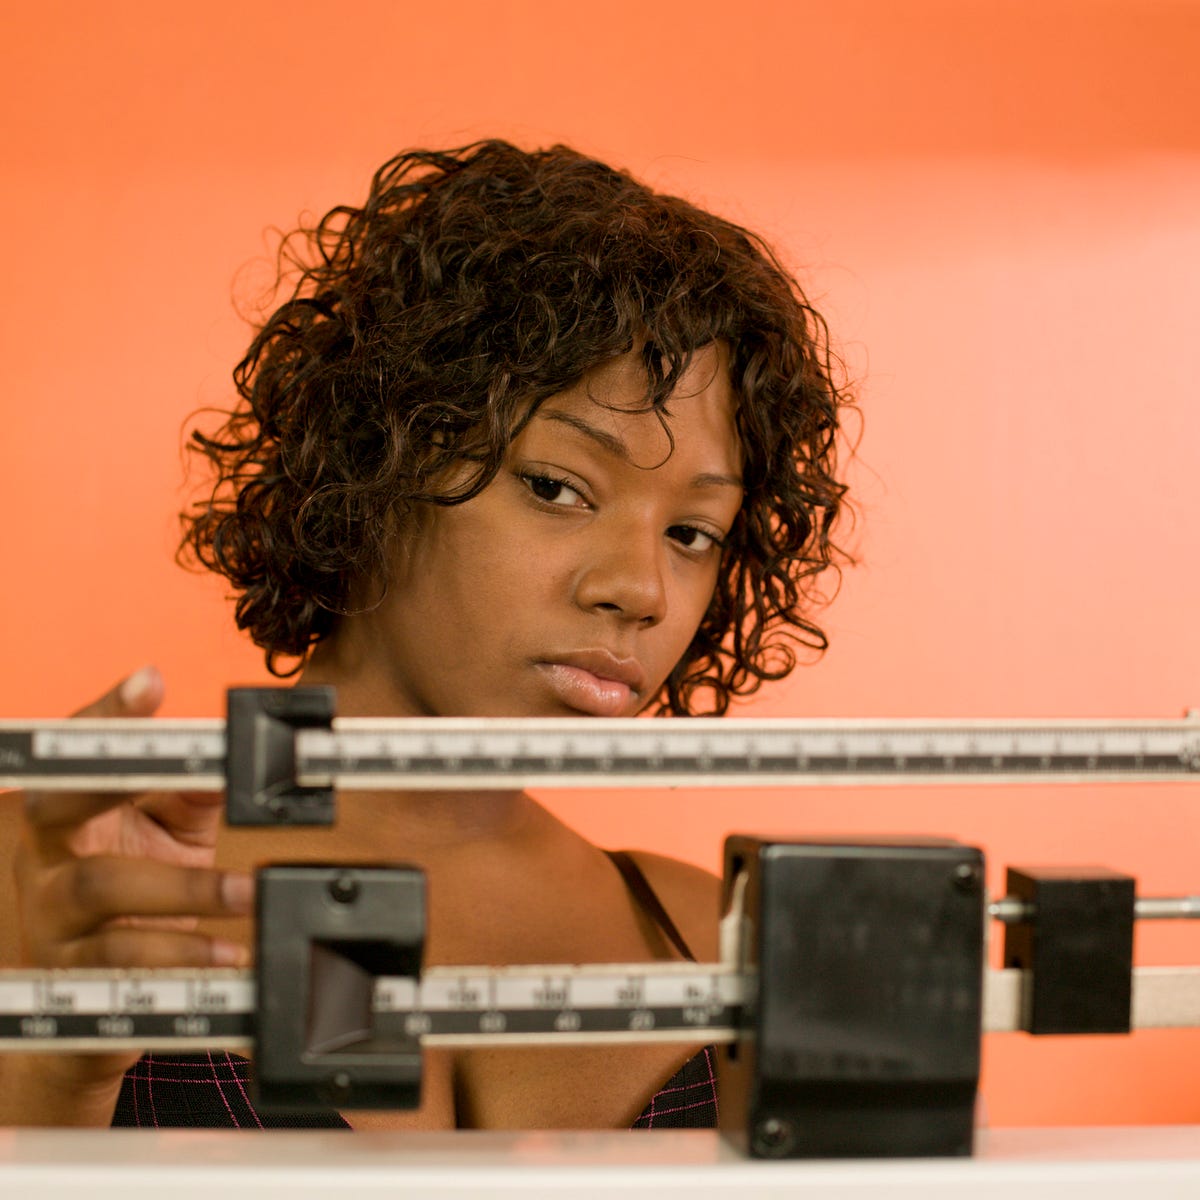 Obesity scale: effective body weight testing for home use